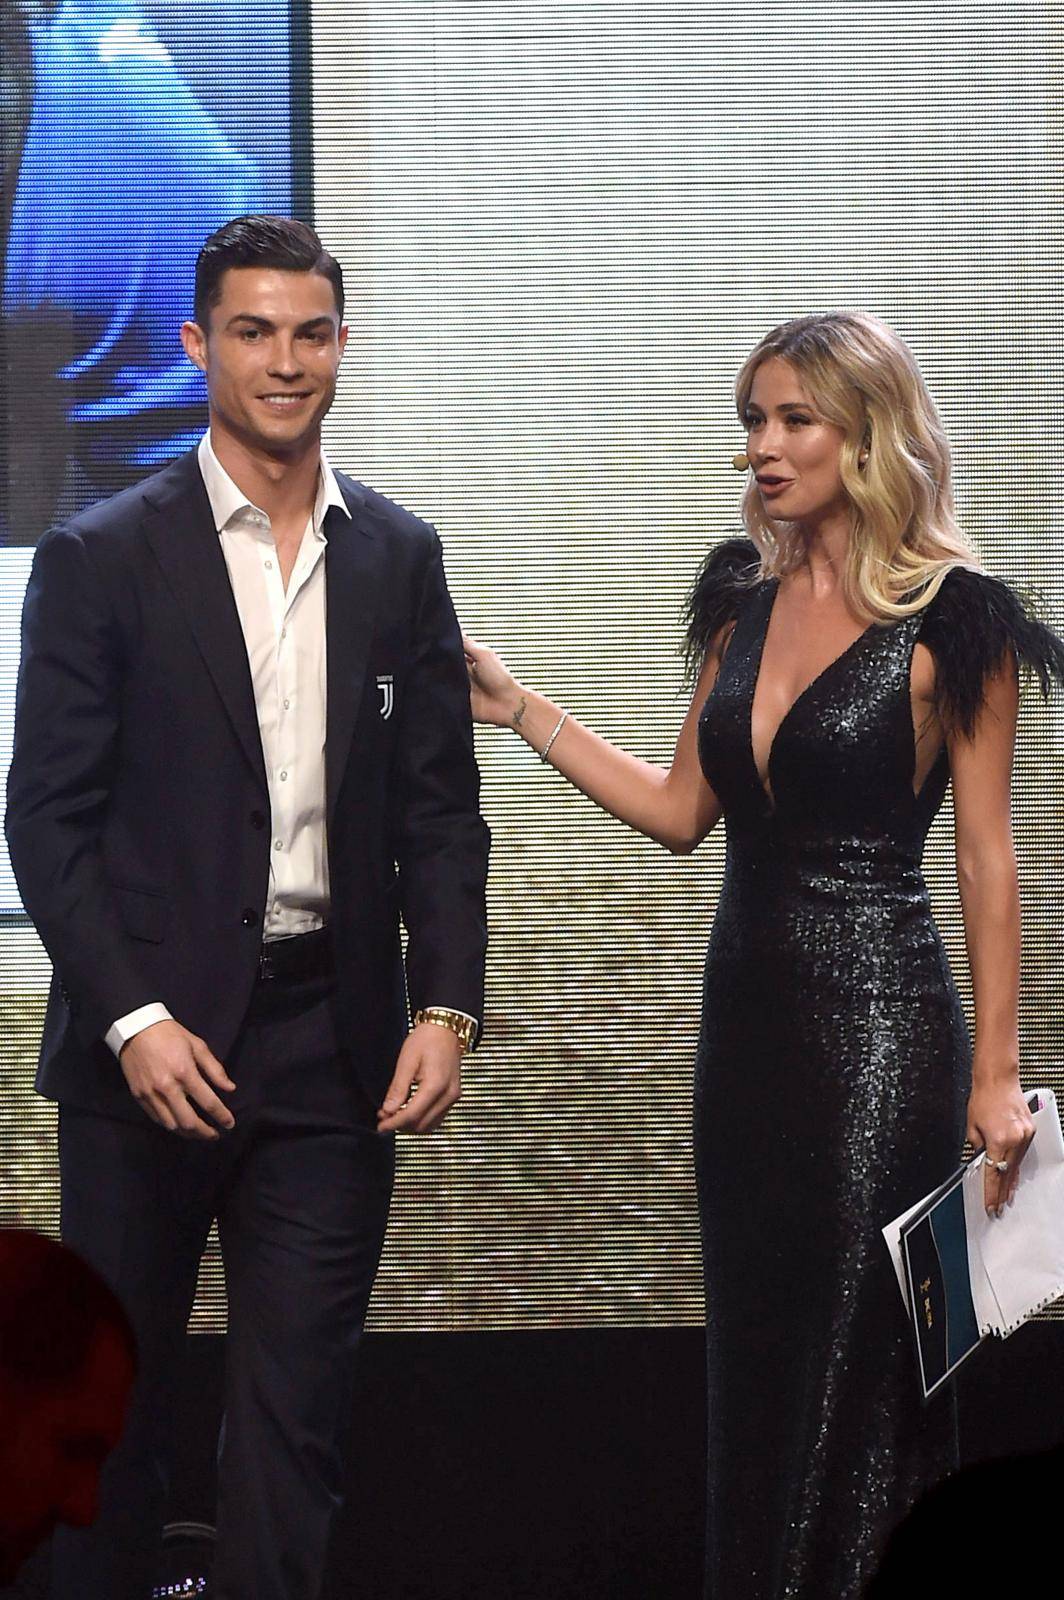 Milan, Award ceremony for the best football player of "Serie A" 2018/19 season